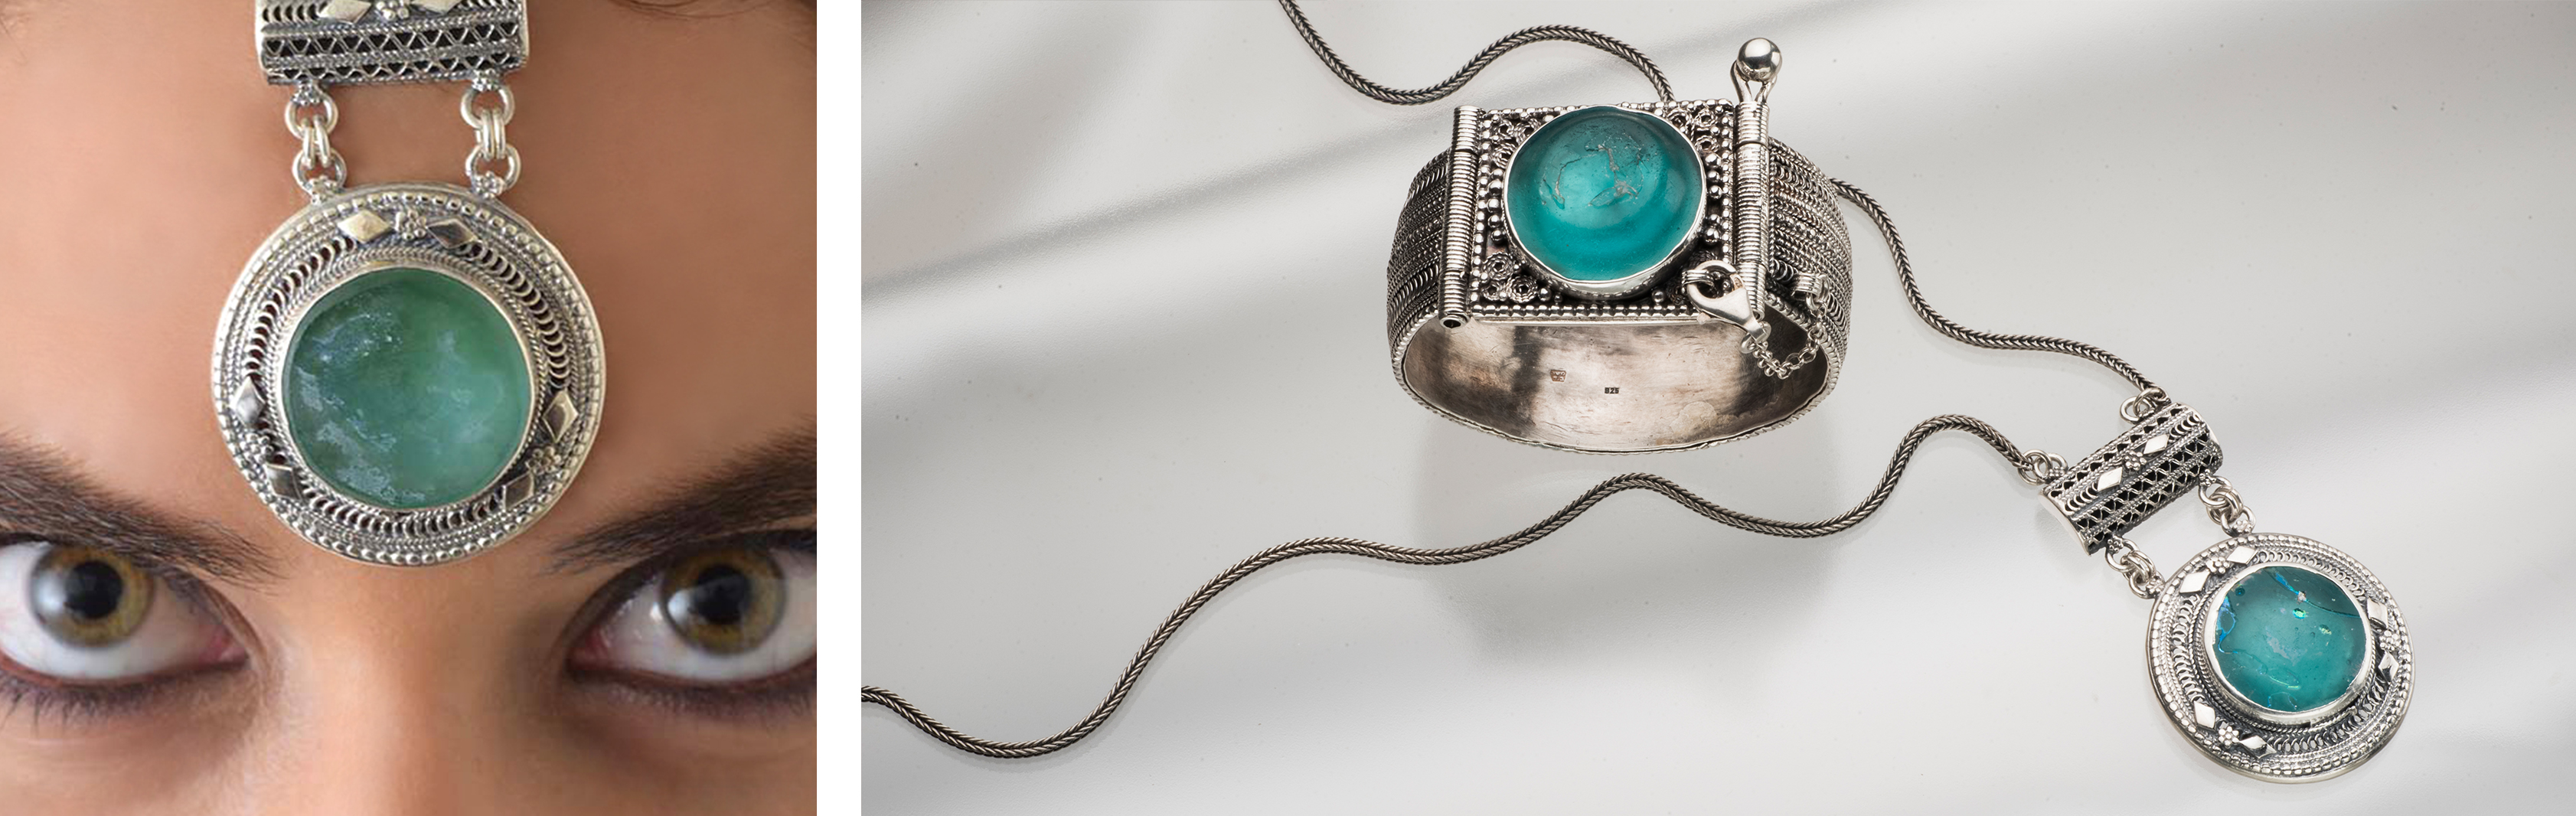 Roman Glass: The Classic Collection | Handmade 925 Sterling Siver Jewelry with Roman Glass